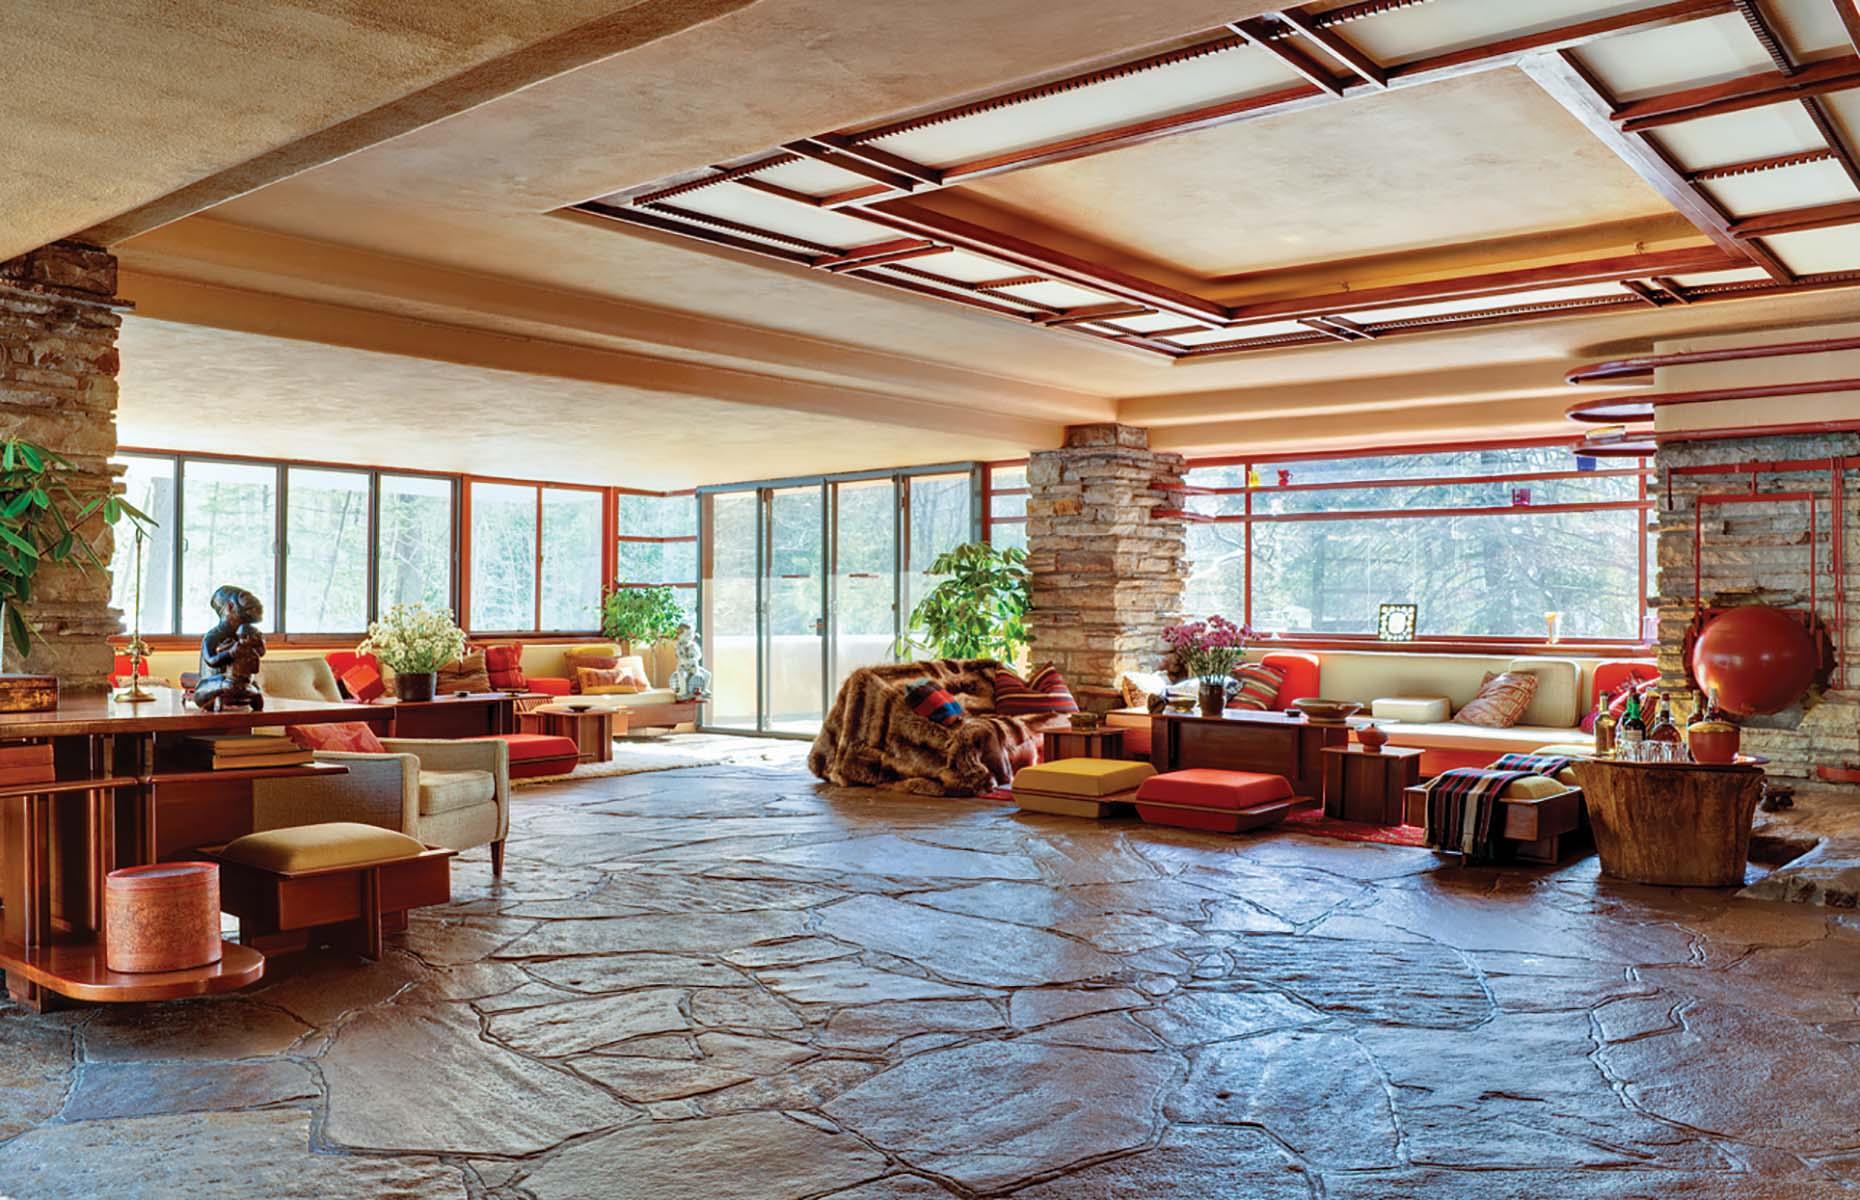 <p>The stunning house is often regarded as Wright's most accomplished design and it's included in Smithsonian's Life List of 28 Places to See Before You Die. Both guided and self-guided tours are available, however, <a href="https://fallingwater.org/experience-fallingwater/">currently they only focus on the exterior and the grounds</a>. All visitors are required to wear a face covering and follow other safety measures. </p>